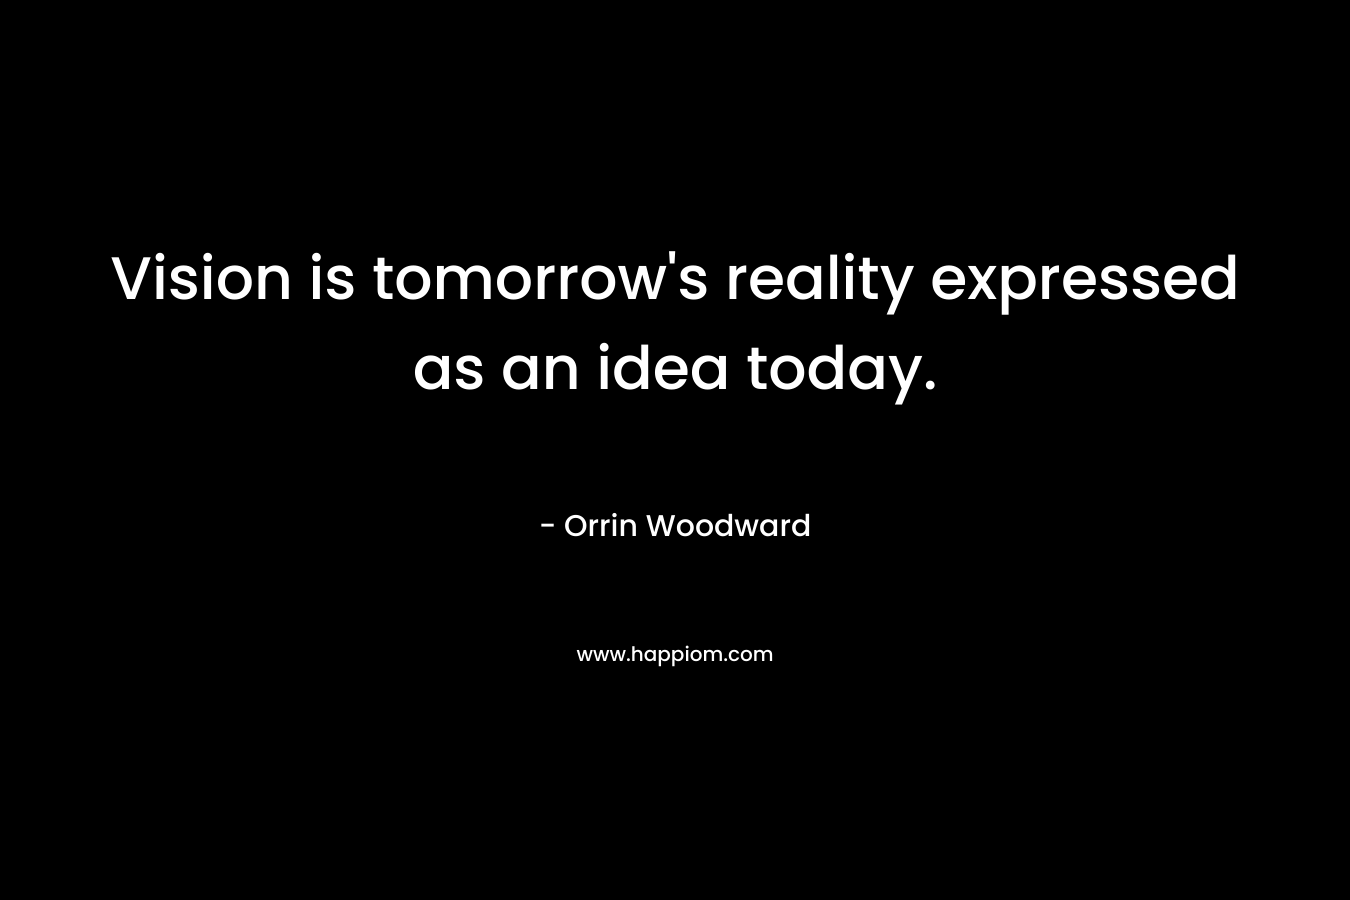 Vision is tomorrow’s reality expressed as an idea today. – Orrin Woodward